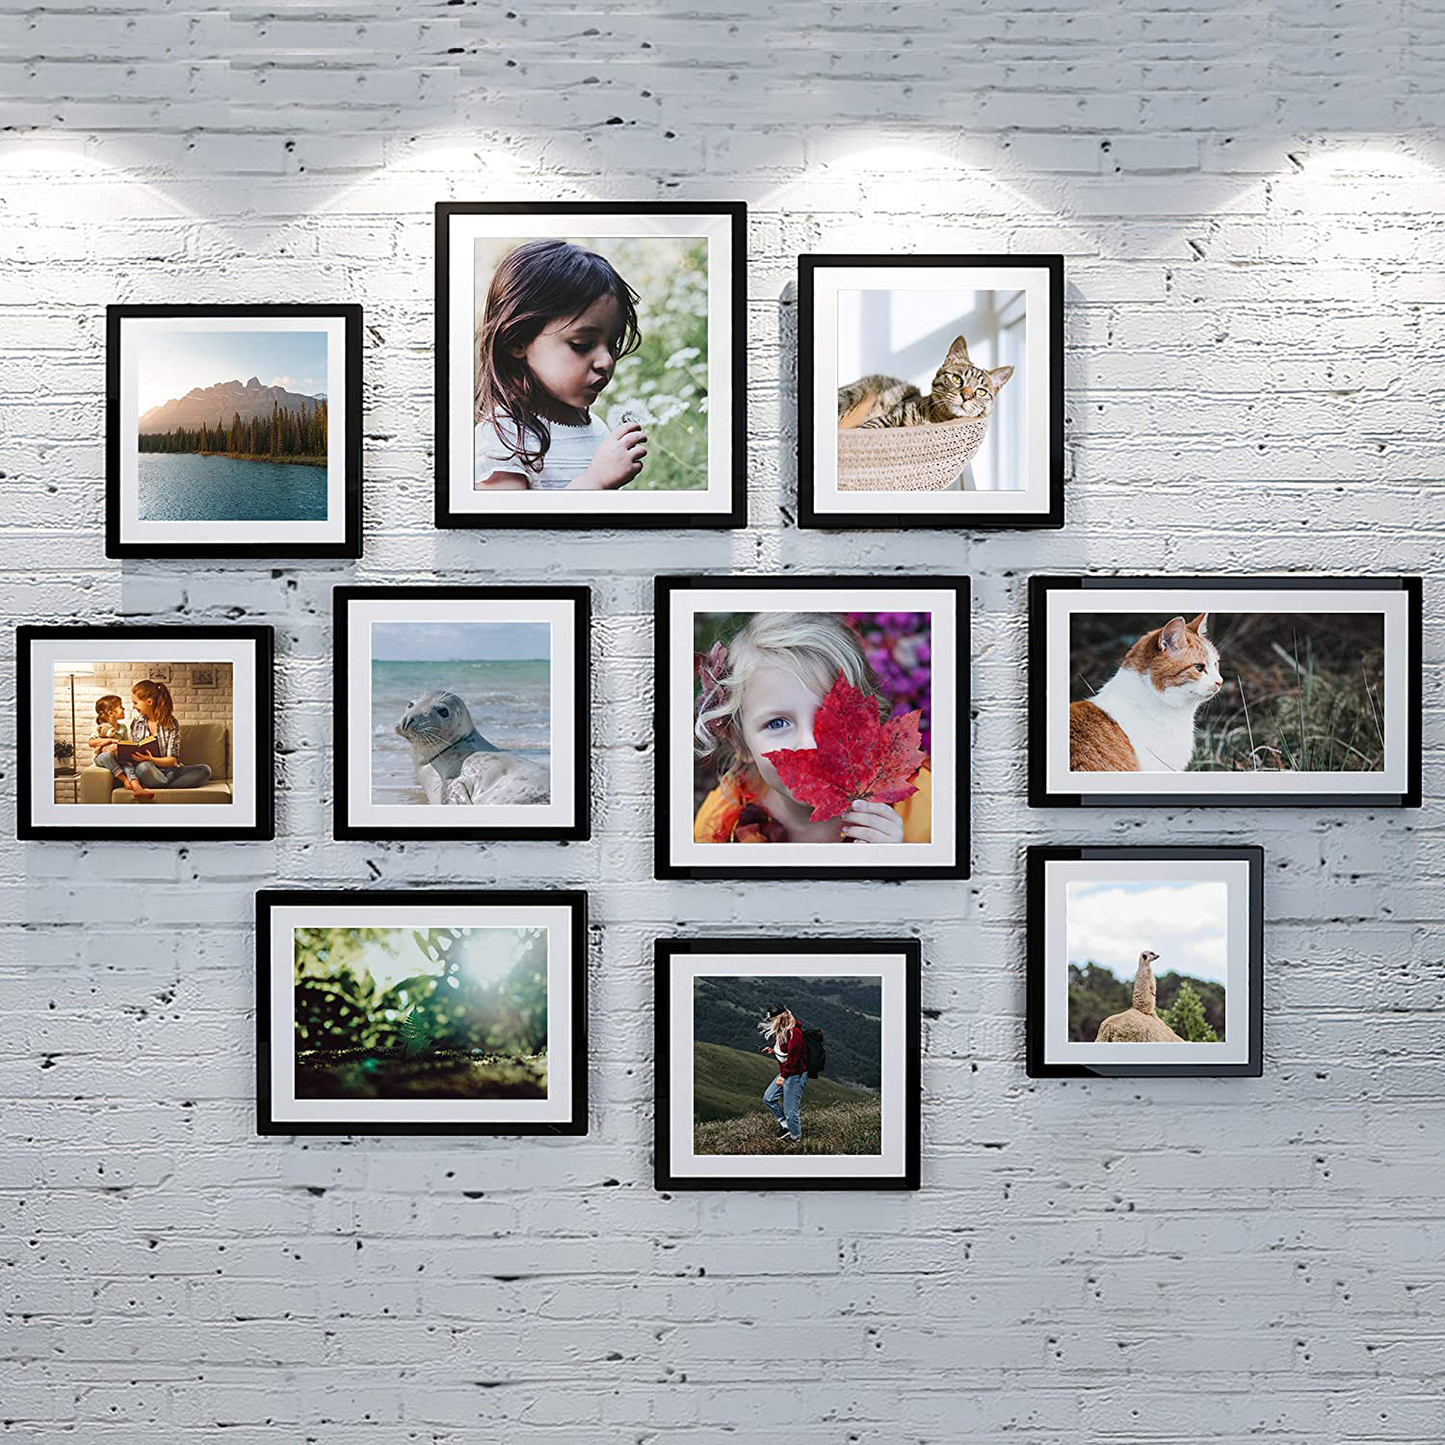 upsimples 8.5x11 Picture Frame Set of 10,Display Pictures 6x8 with Mat or 8.5x11 Without MatMulti Photo Frames Collage for Wall or Tabletop Display,White